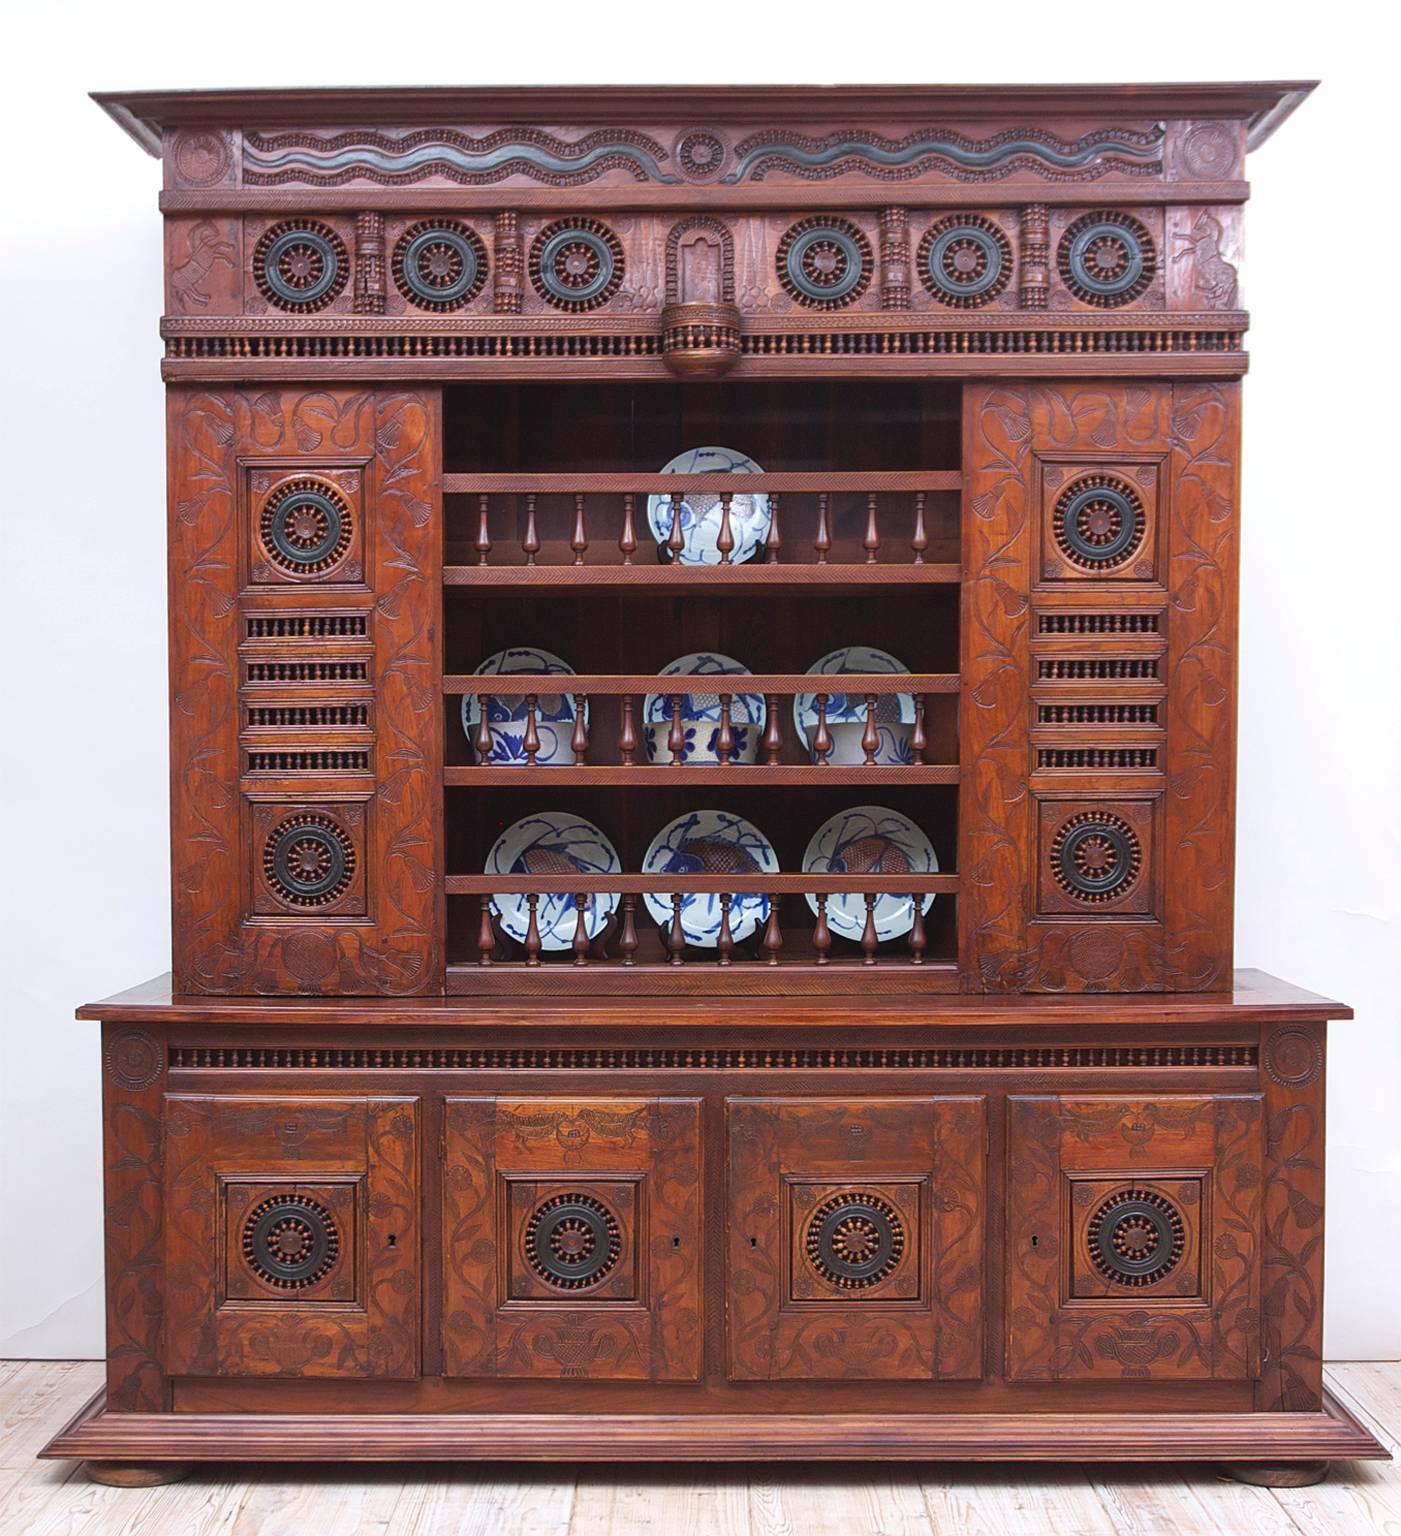 A strikingly handsome and very unusual cupboard in Jarrah wood and polychrome wood with decorative carvings depicting birds, pinwheels, foliage and flowers. Offers several open shelves with galleries with turned finials that serve to hold dishes,